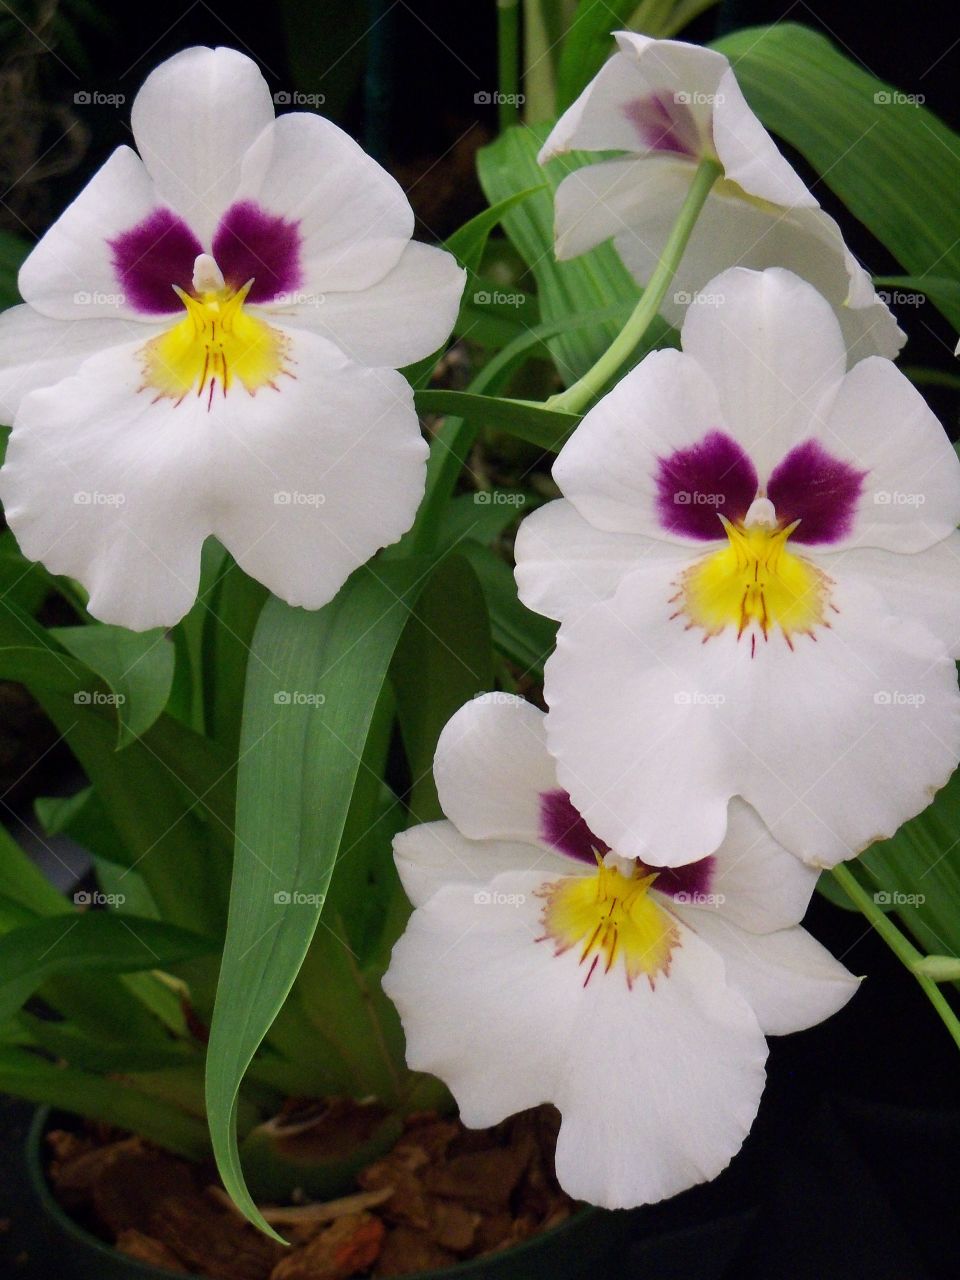 White orchids with eye-like purple marks and yellow nose-mouthlike